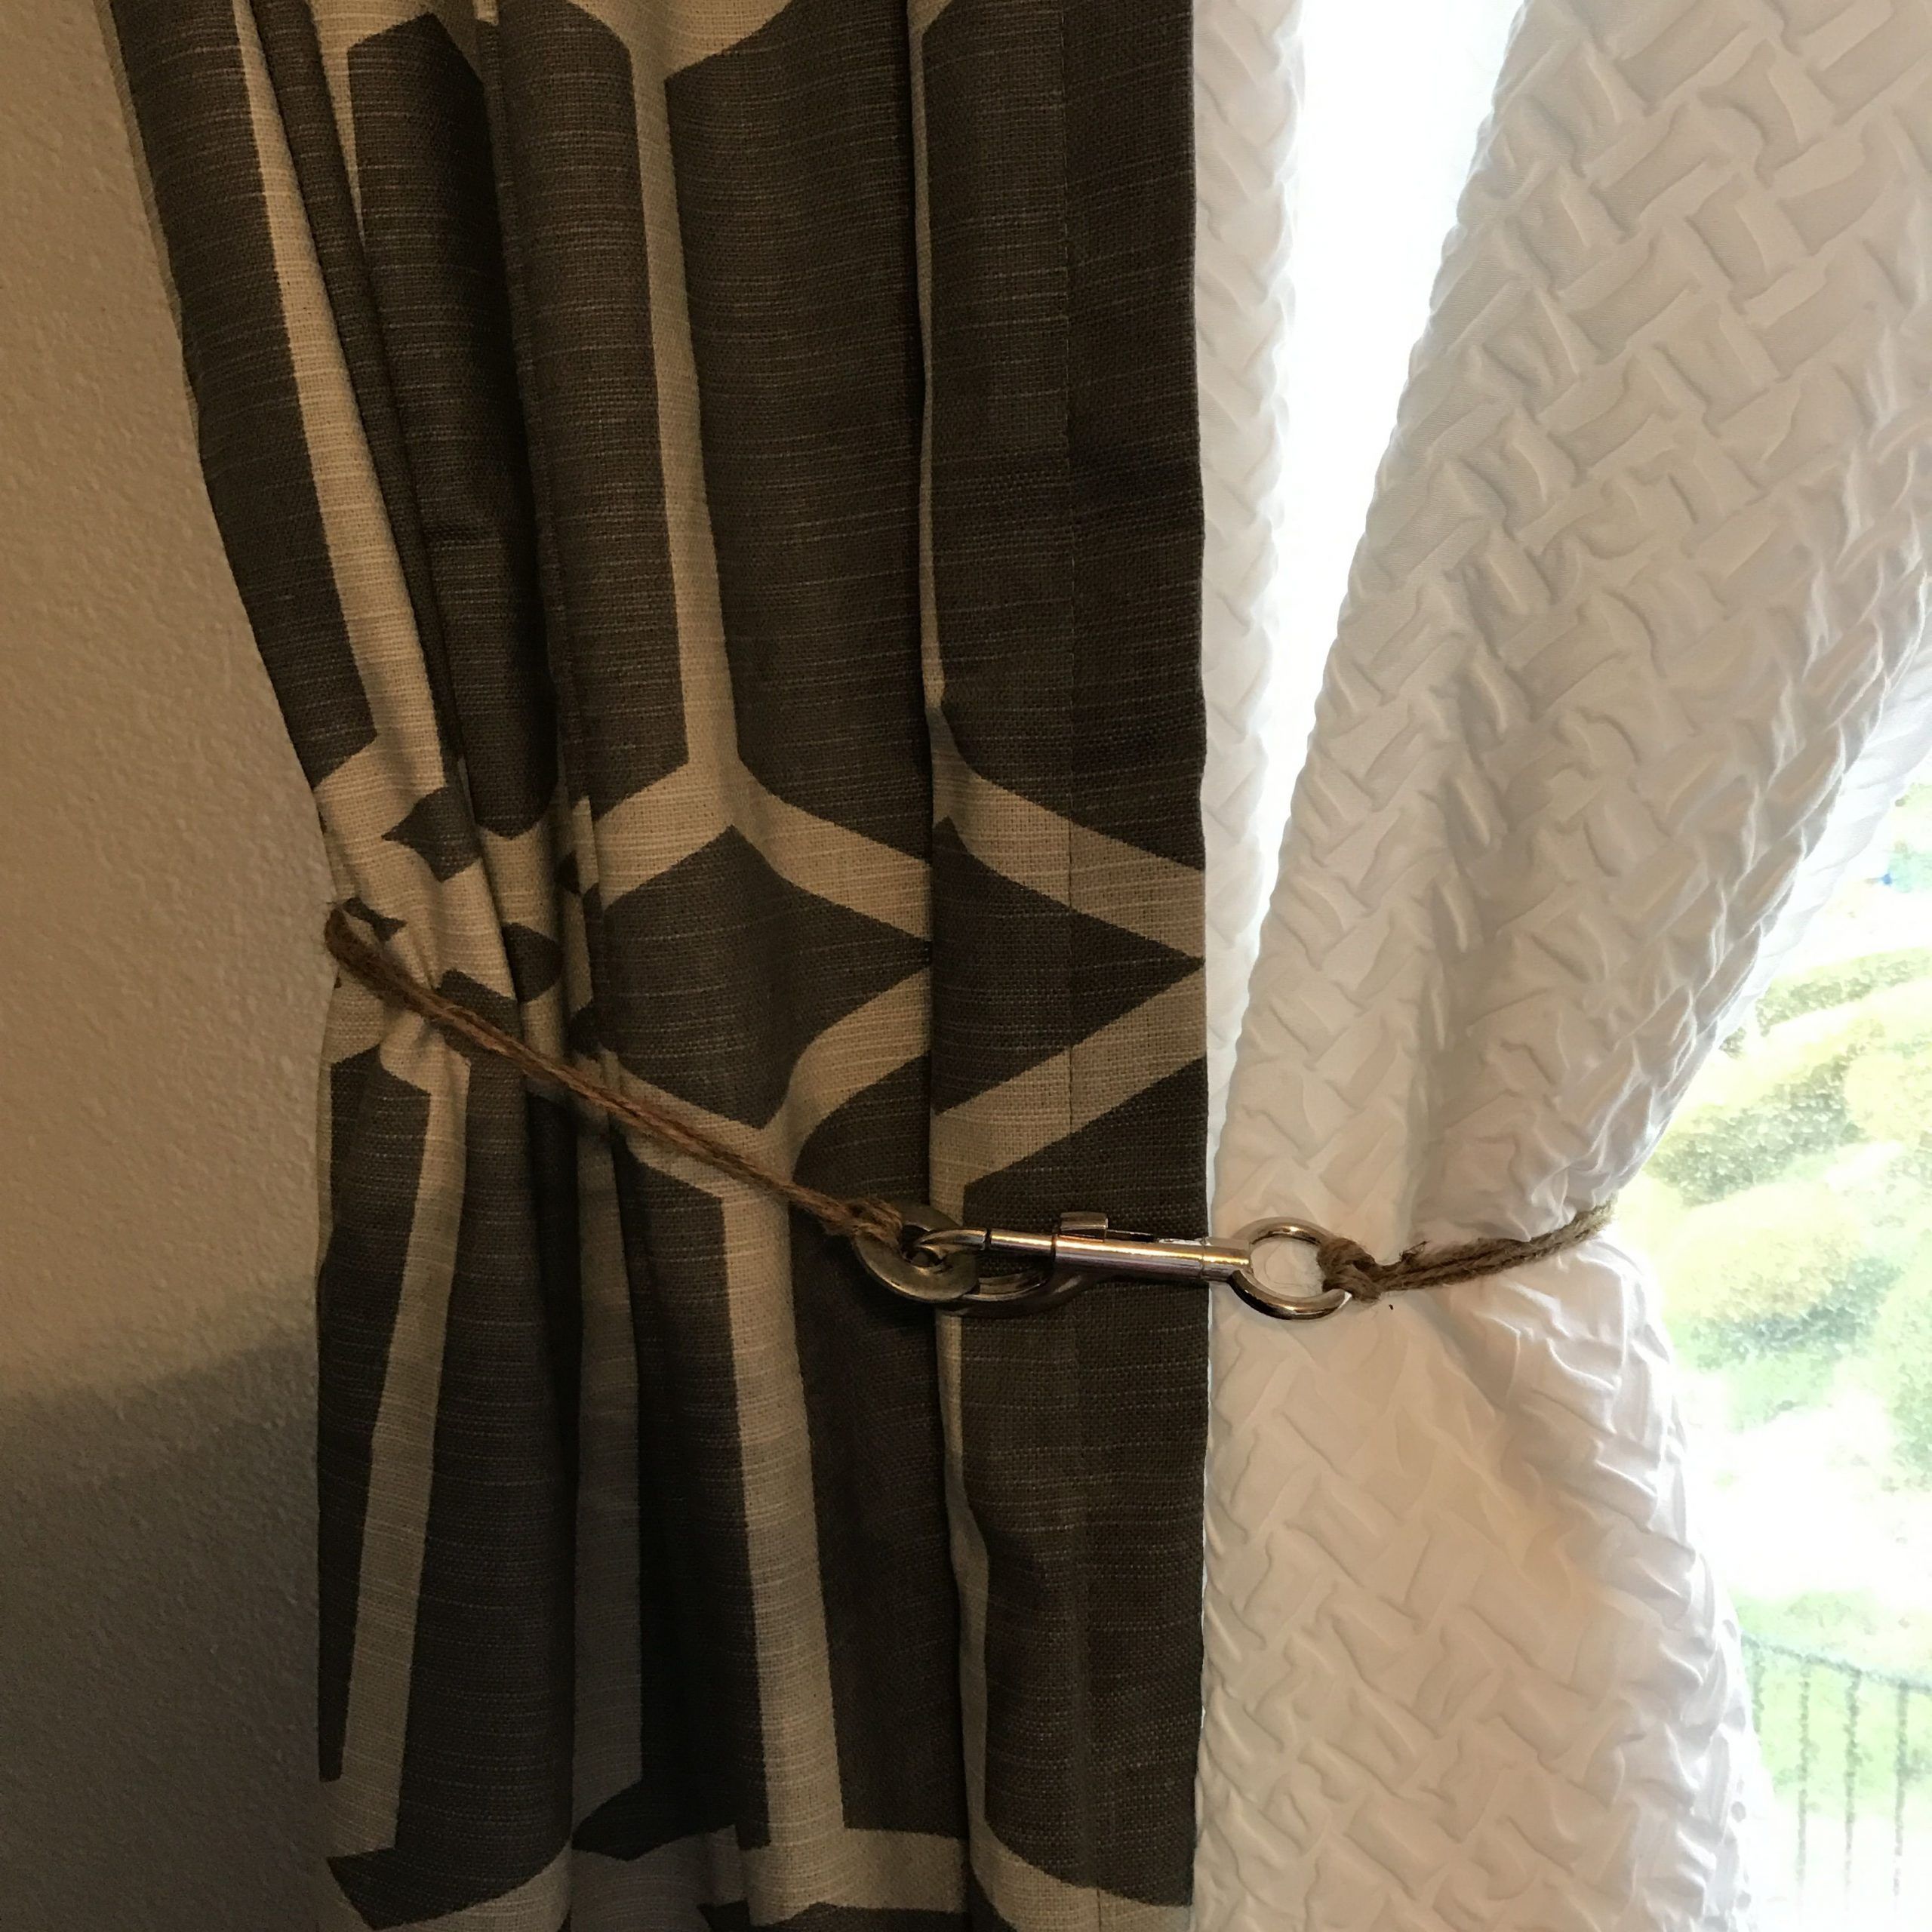 Rustic Curtain Tie Backs | I Did It! | Curtains, Rustic For Bermuda Ruffle Kitchen Curtain Tier Sets (View 17 of 20)